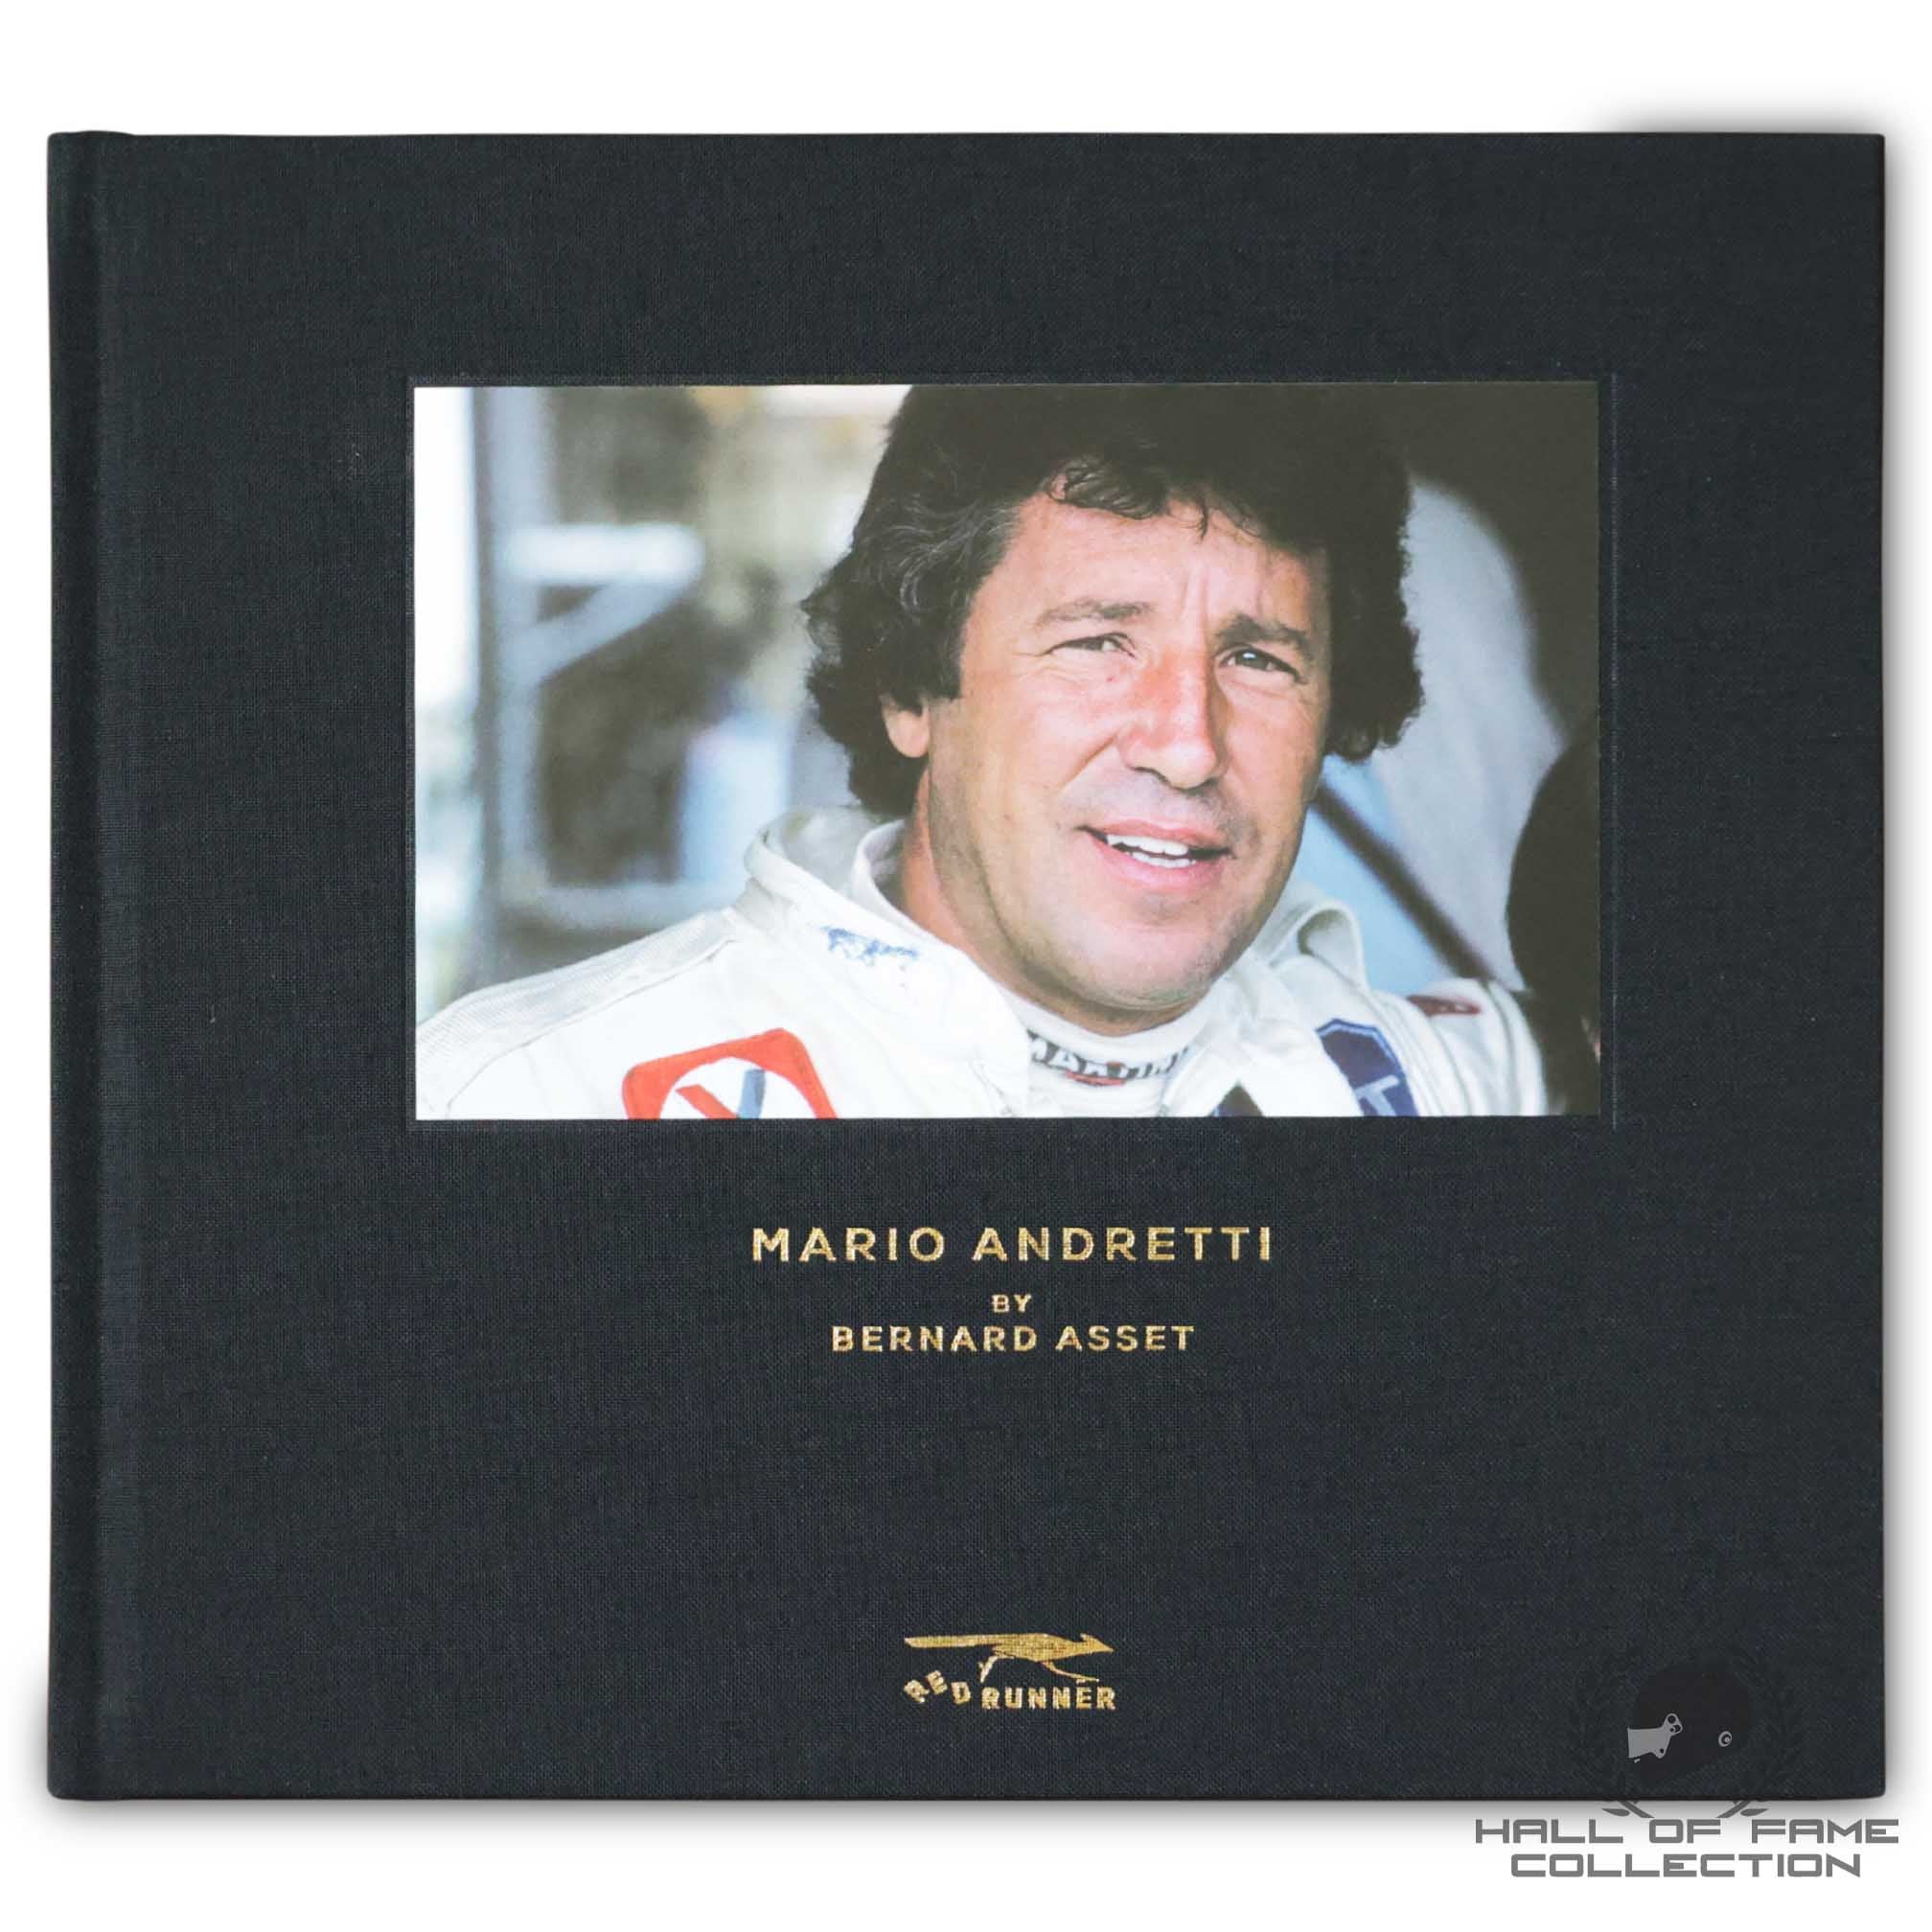 Mario Andretti Signed Limited Edition Bernard Asset Collectable Coffee Table Book